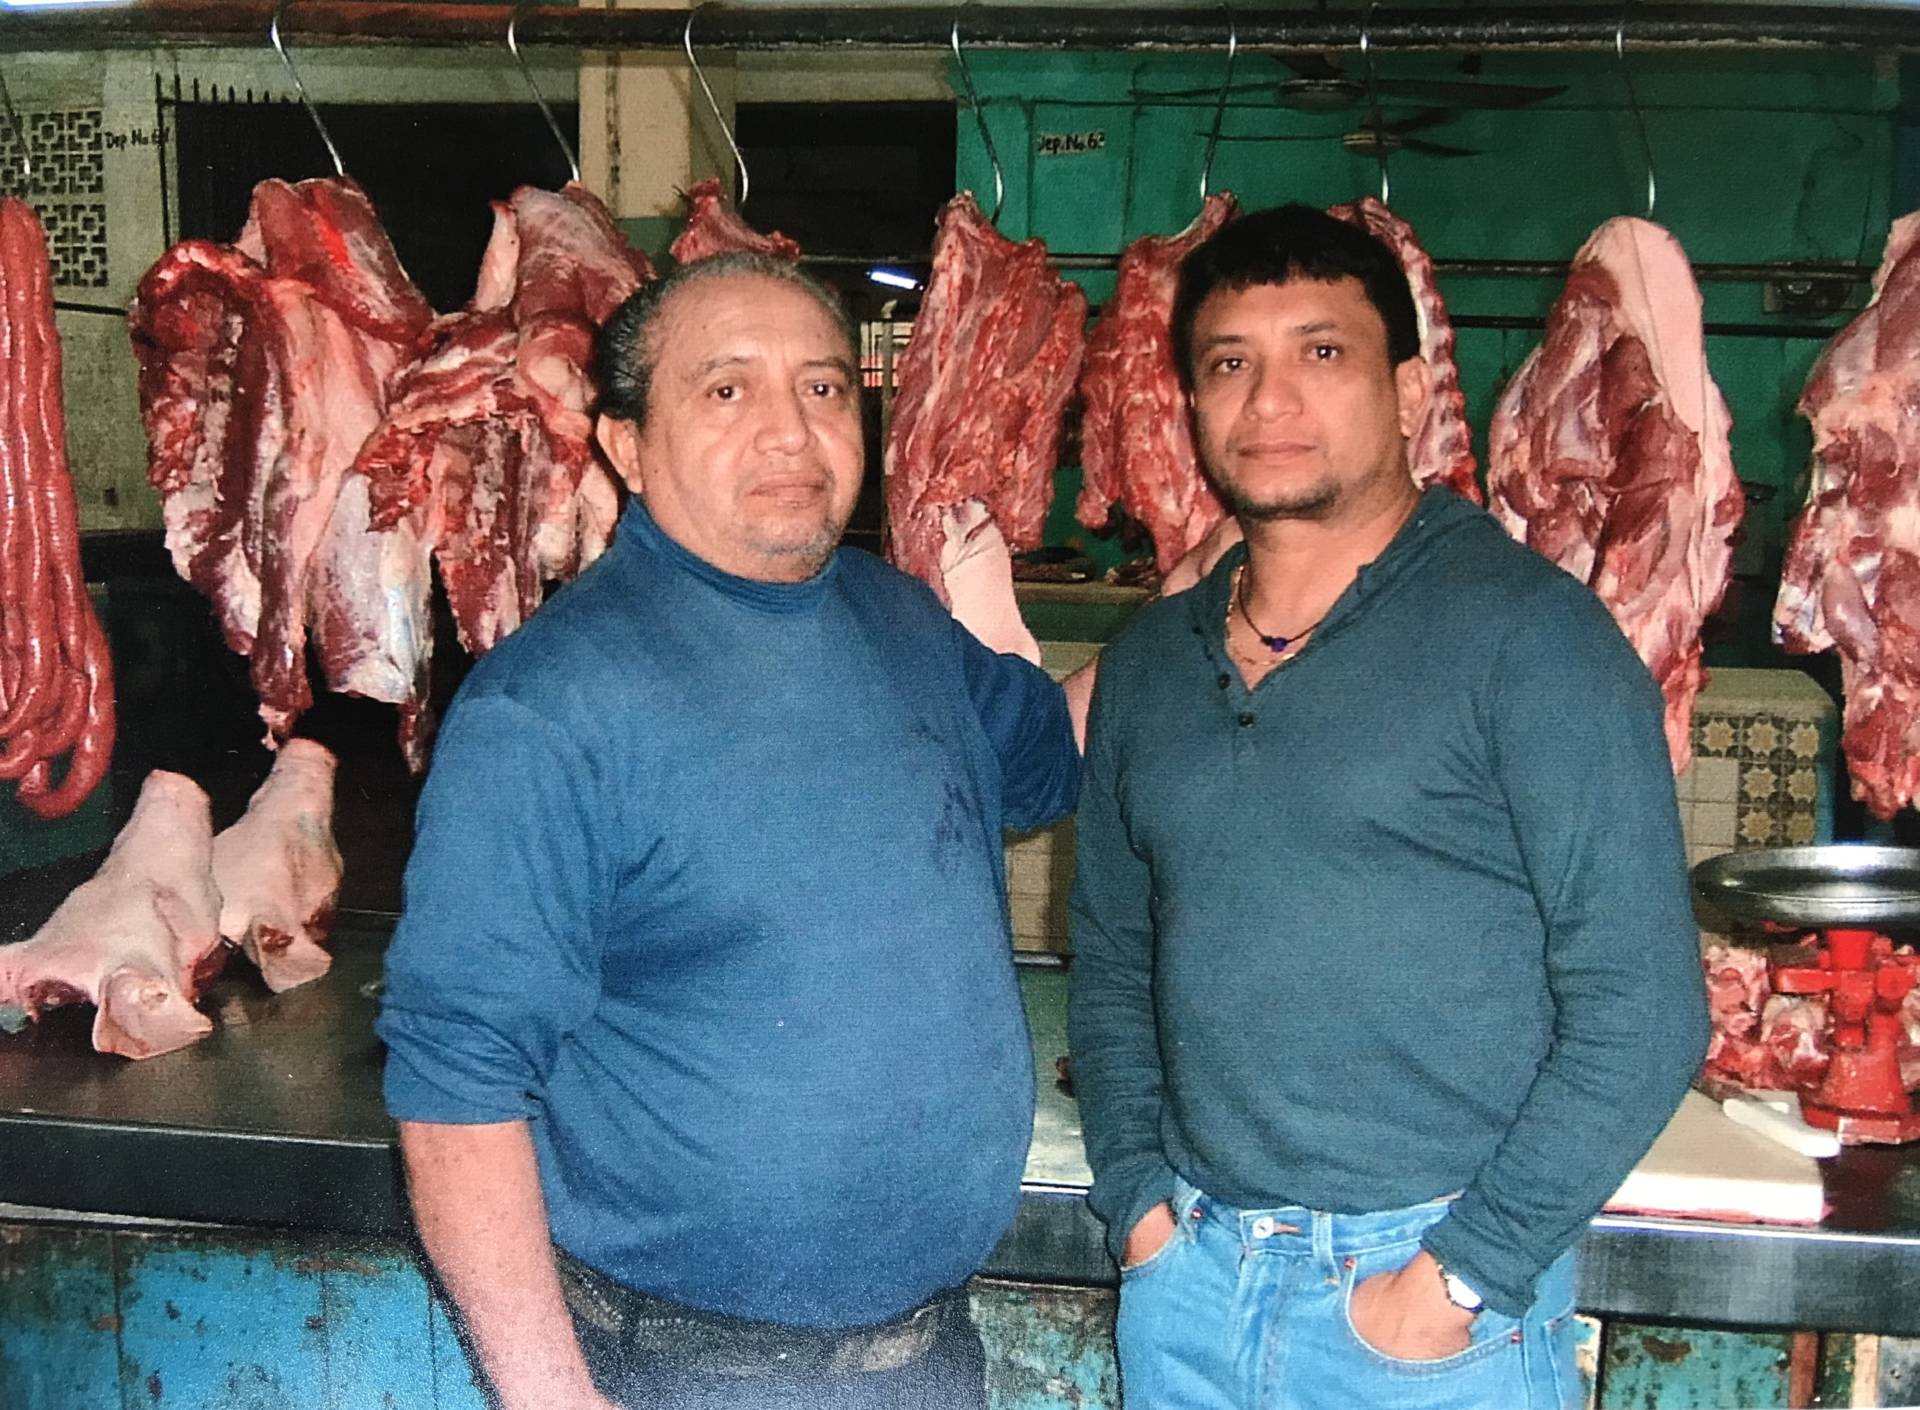 Mateo and father in the butchery